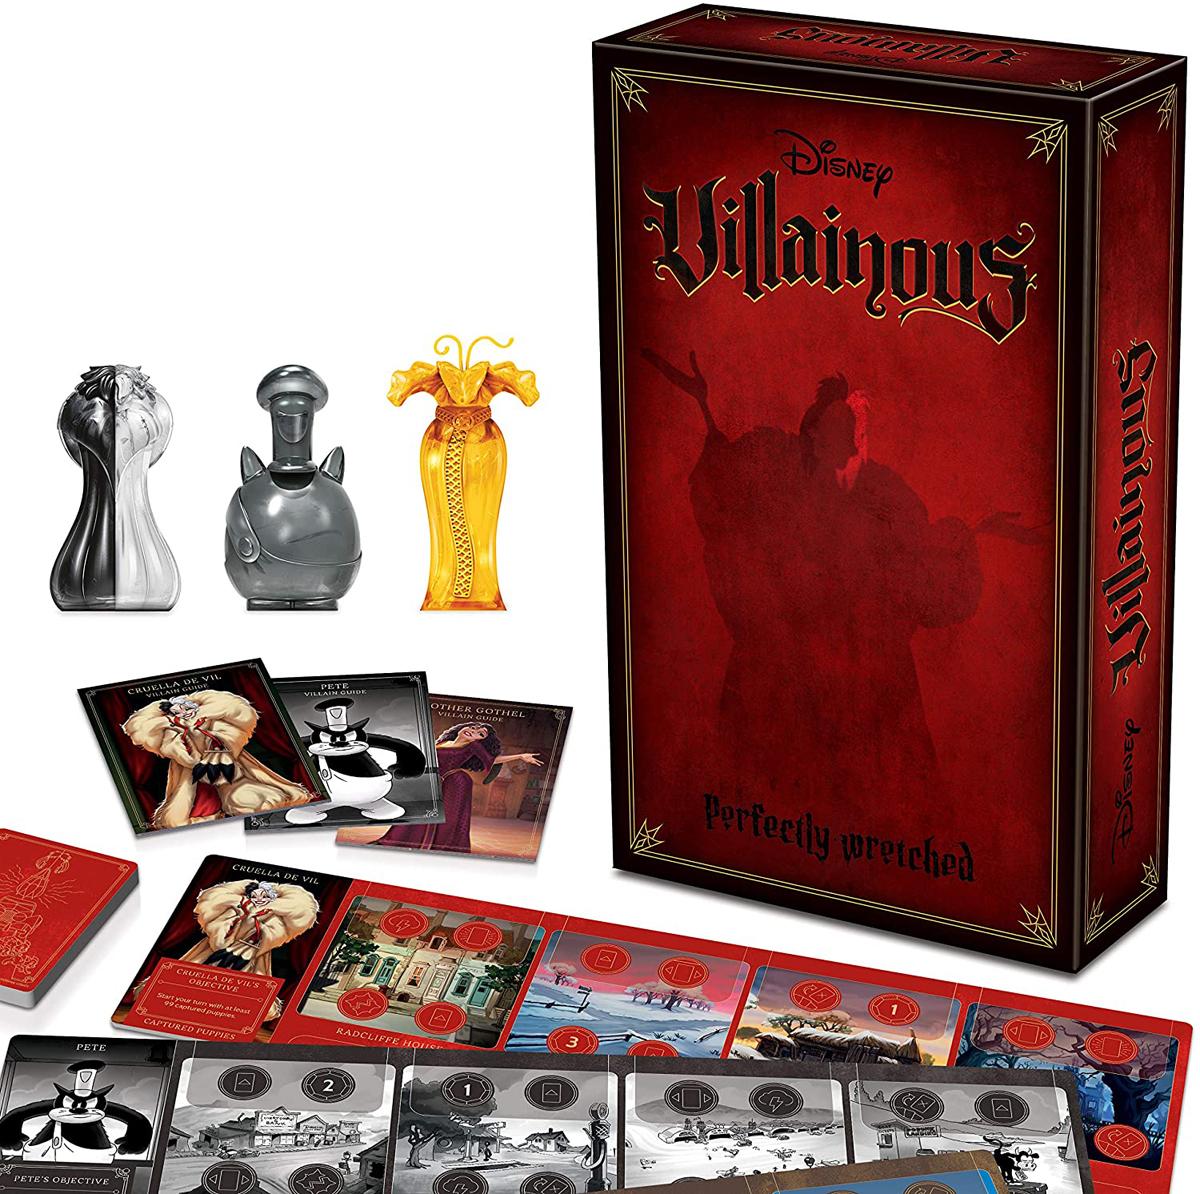 Ravensburger Disney Villainous Perfectly Wretched Strategy Board Game for $10.39